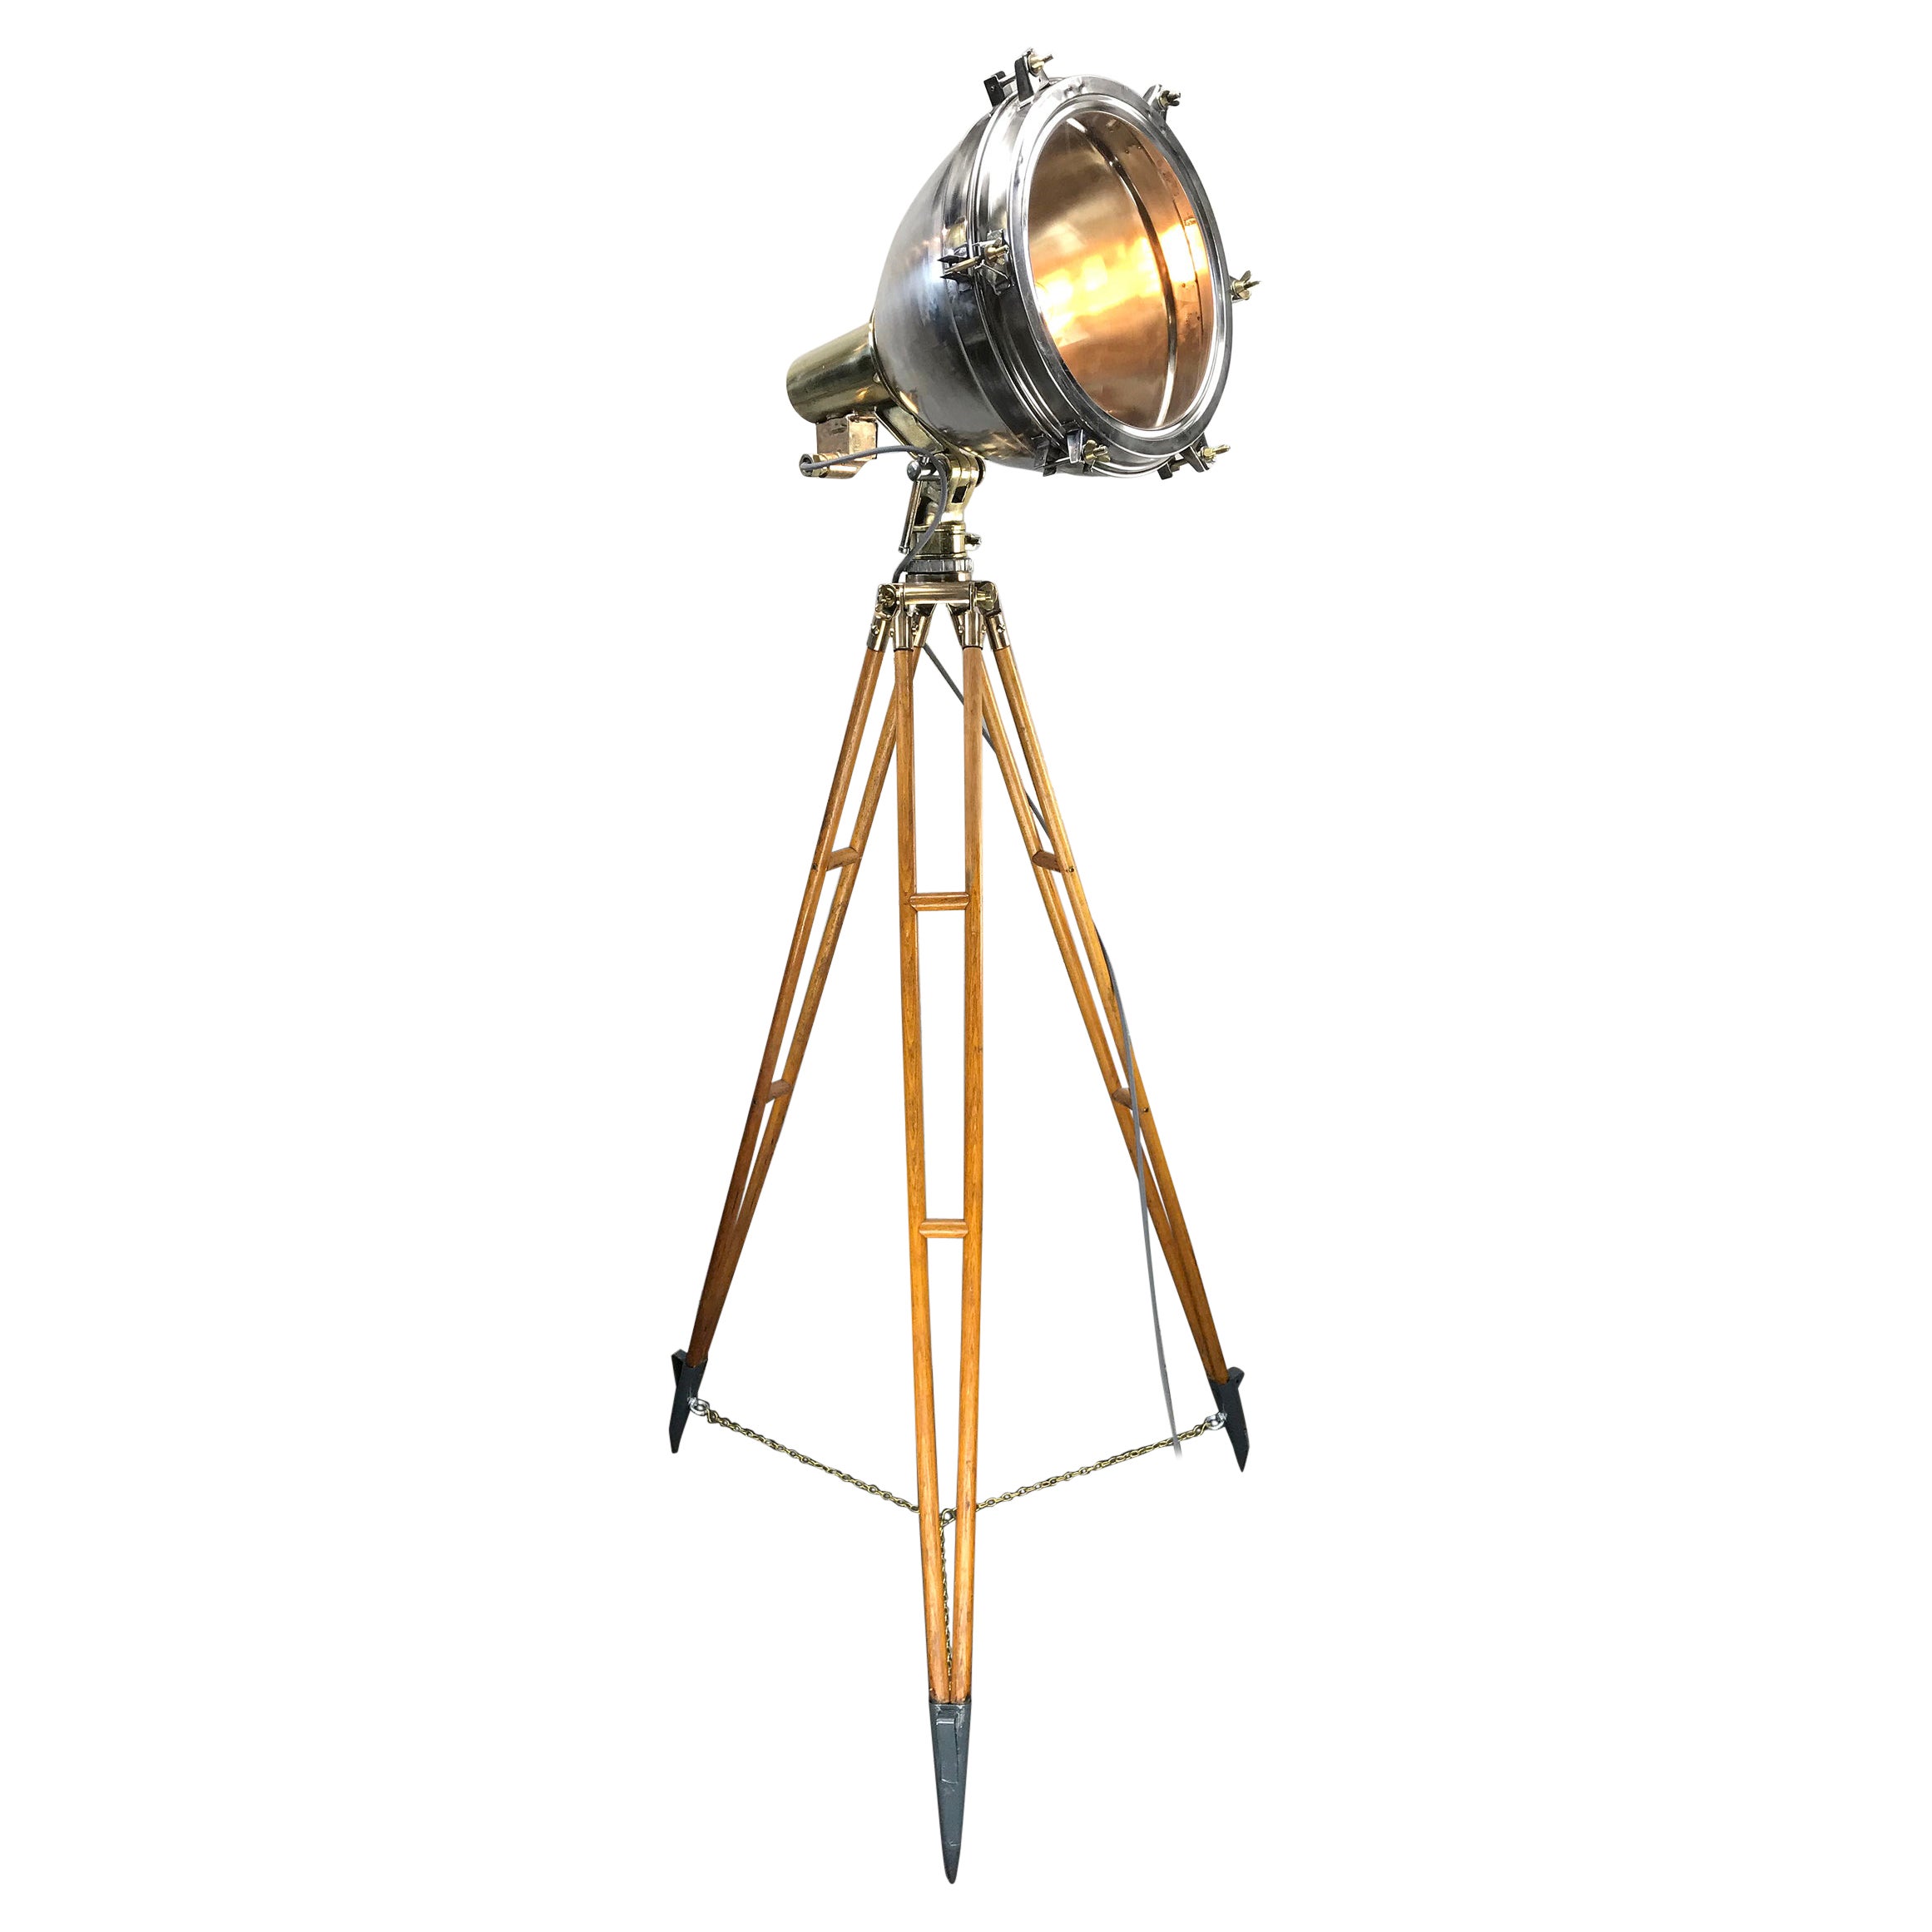 1970s Japanese Industrial Brass, Bronze and Stainless Steel Search Light Tripod For Sale